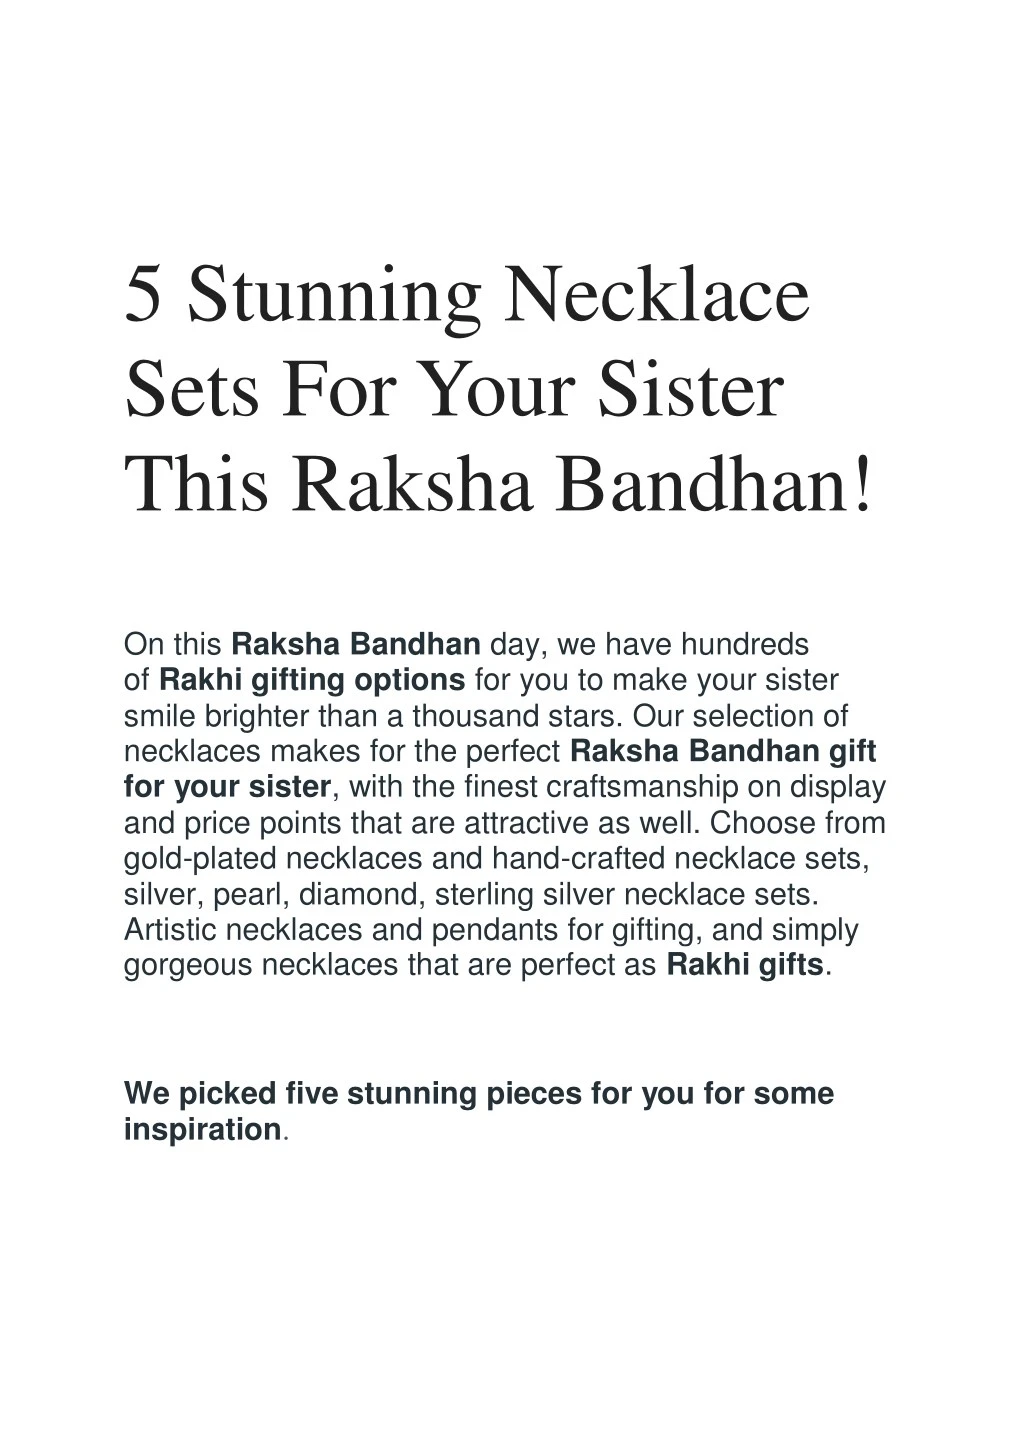 5 stunning necklace sets for your sister this